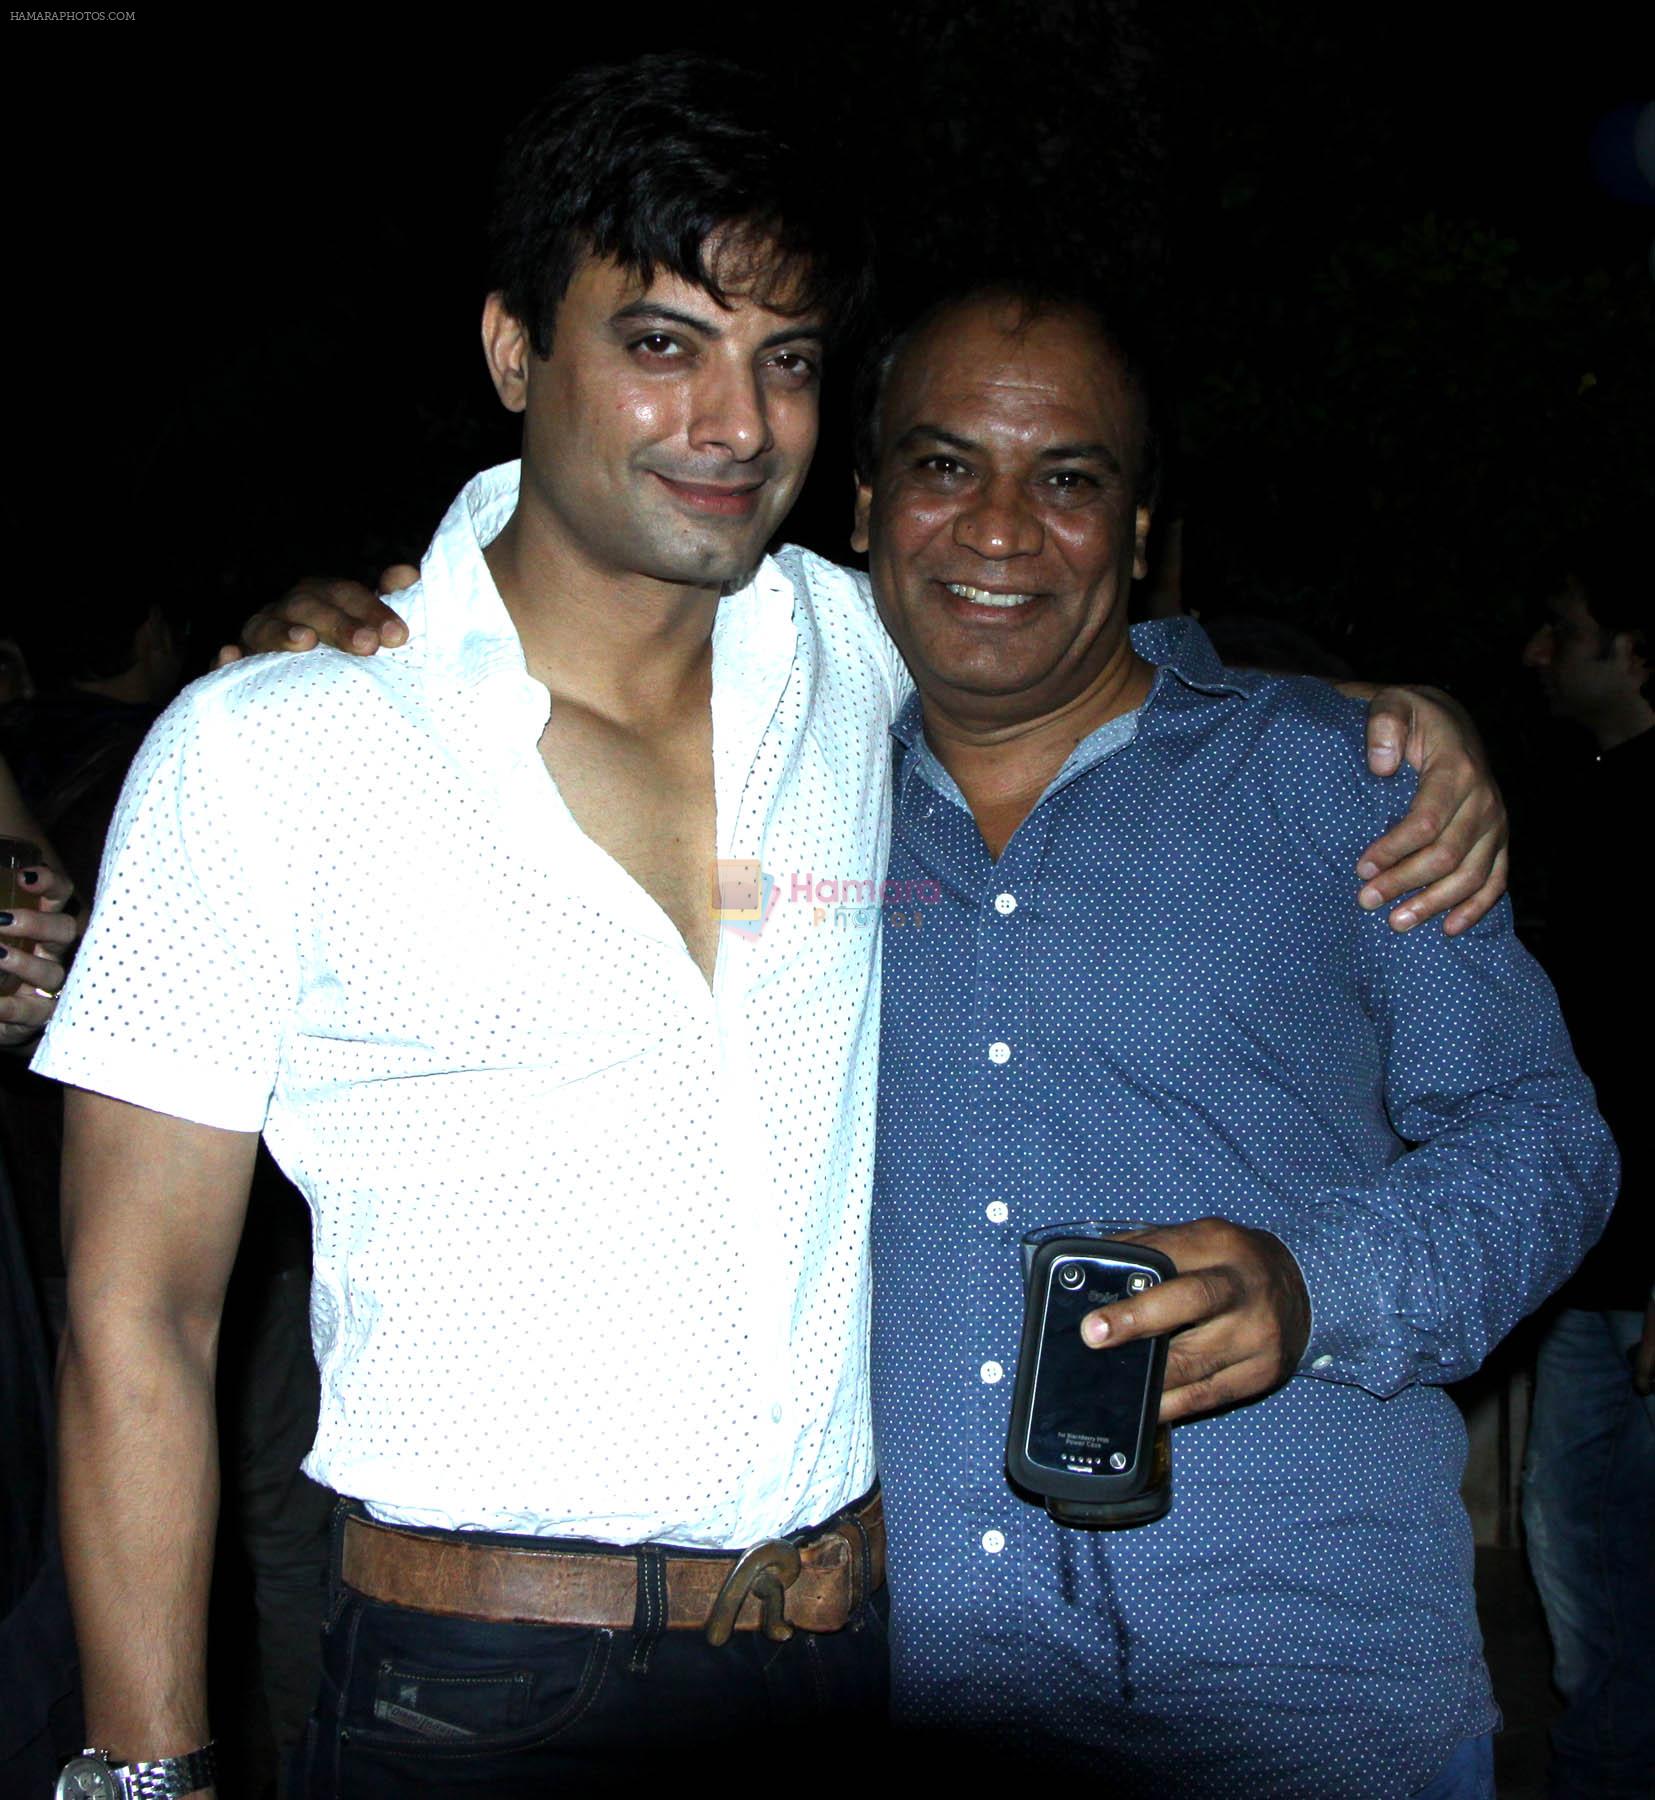 rahul bhat & vipin sharma at a surprise birthday party for Sudhir Mishra by Rahul Bhat in Mumbai on 22nd Jan 2014